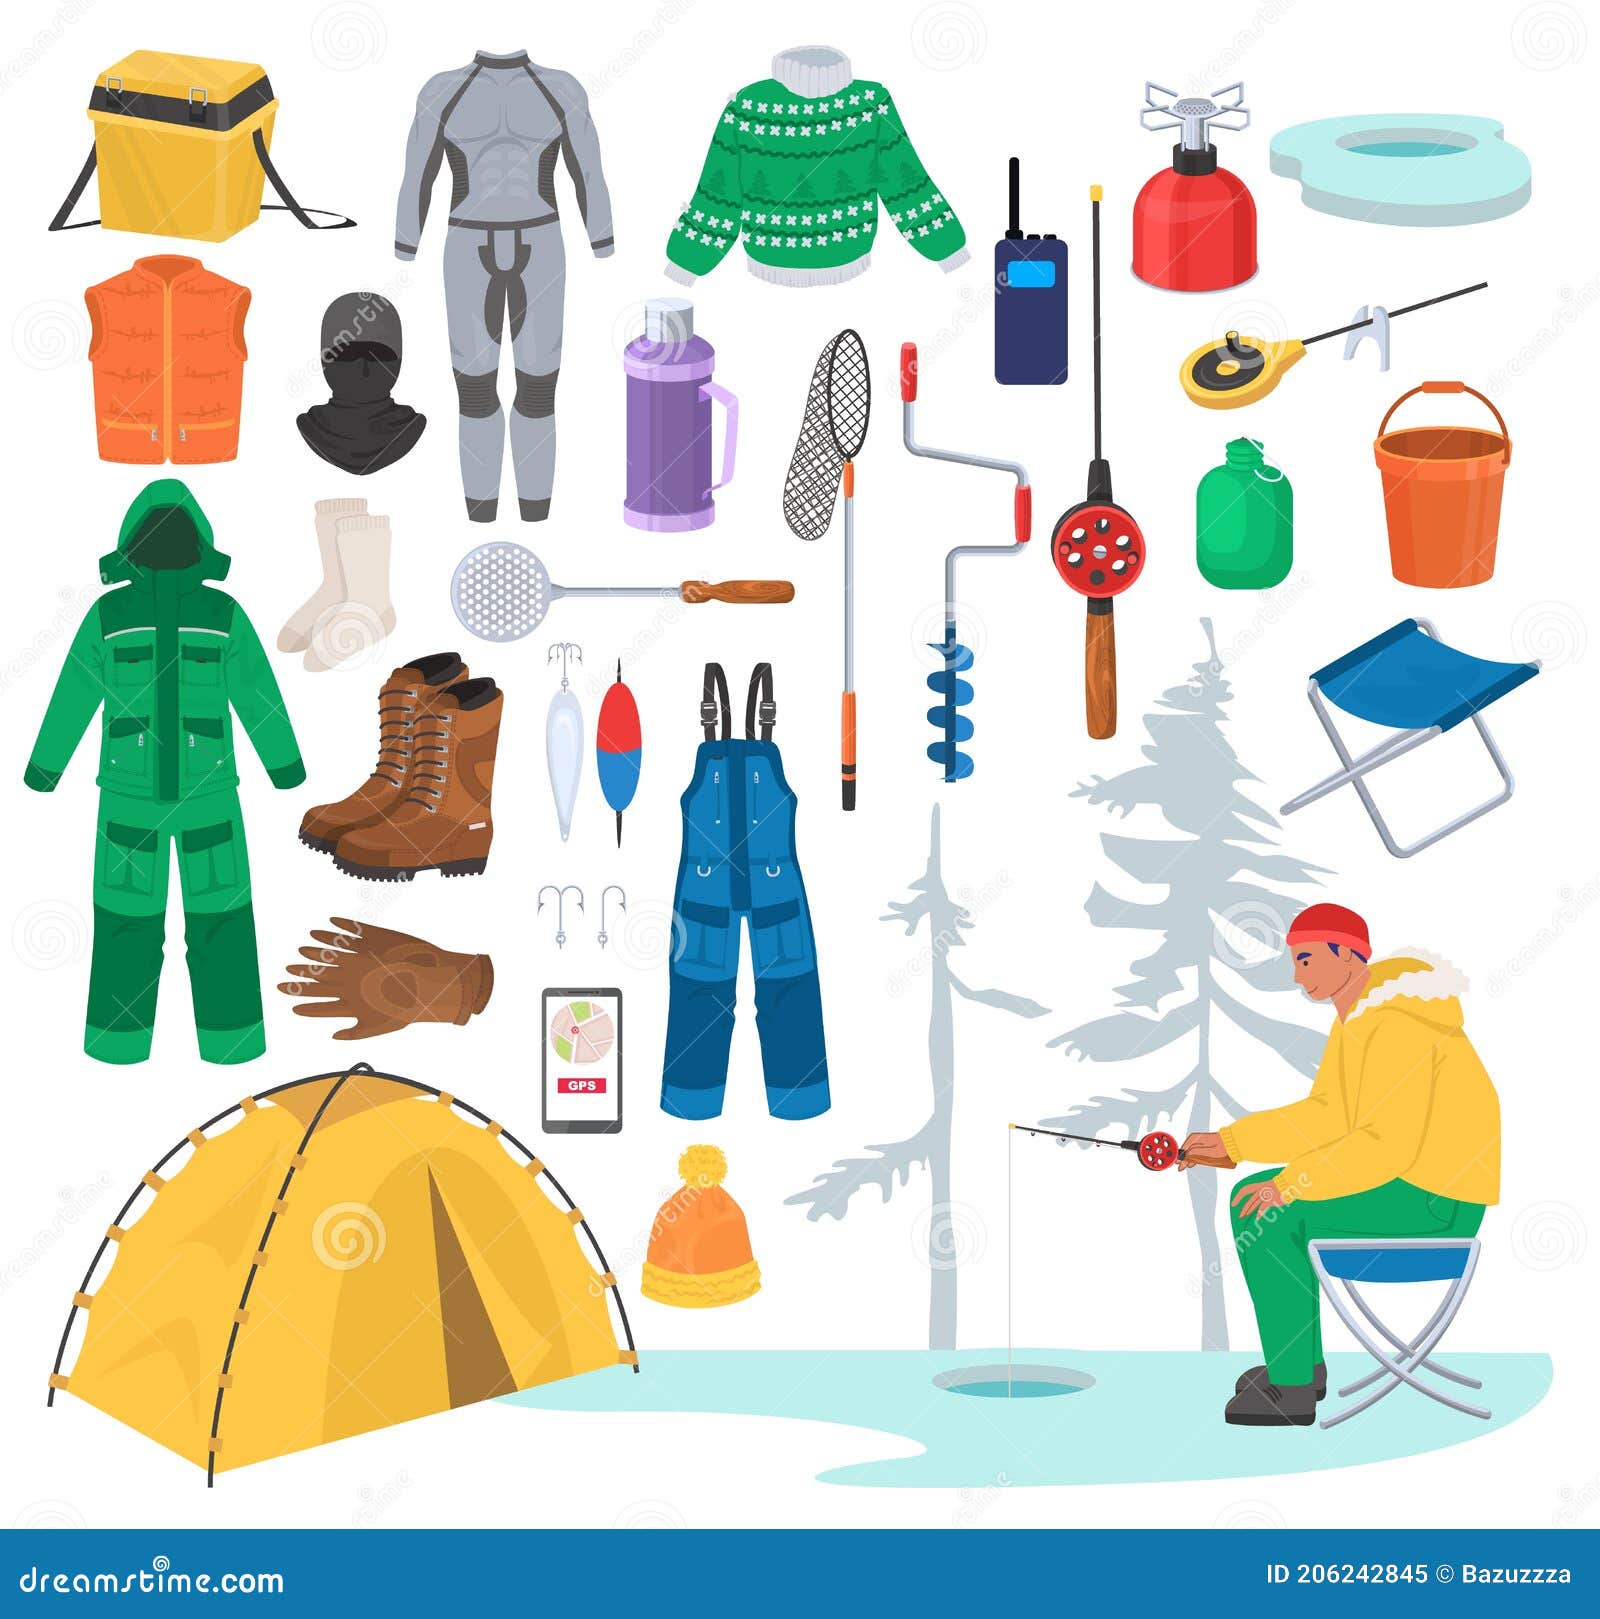 https://thumbs.dreamstime.com/z/ice-fishing-gear-equipment-winter-flat-vector-illustration-warm-clothes-fisherman-tackle-accessories-isolated-boots-gloves-206242845.jpg